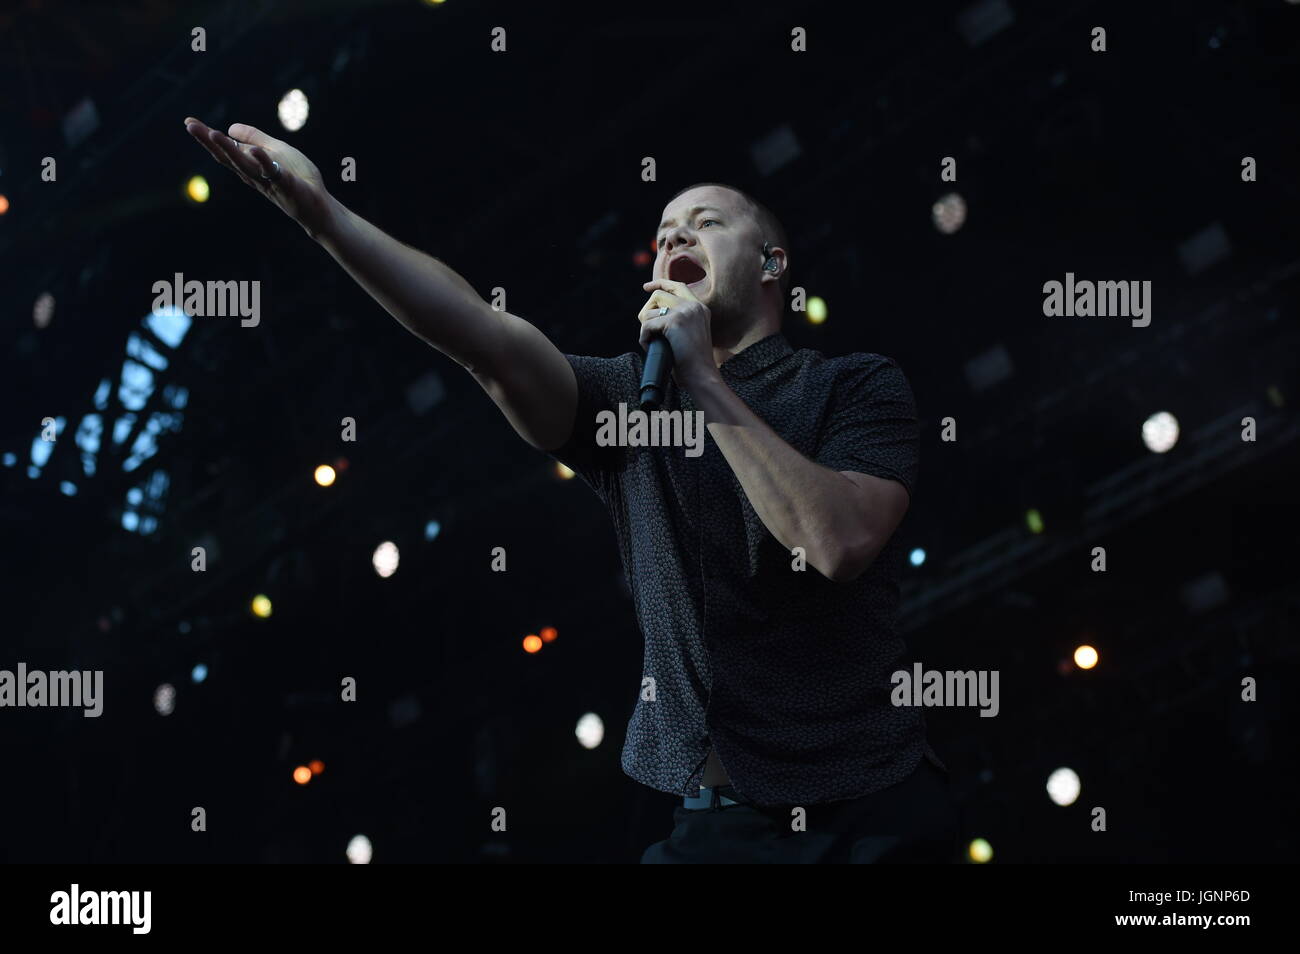 Lisbon, Portugal. 8th July, 2017. US band Imagine Dragons' singer and guitarist Dan Reynolds performs during the 11th Alive Festival in Lisbon, Portugal, on July 8, 2017. Credit: Zhang Liyun/Xinhua/Alamy Live News Stock Photo